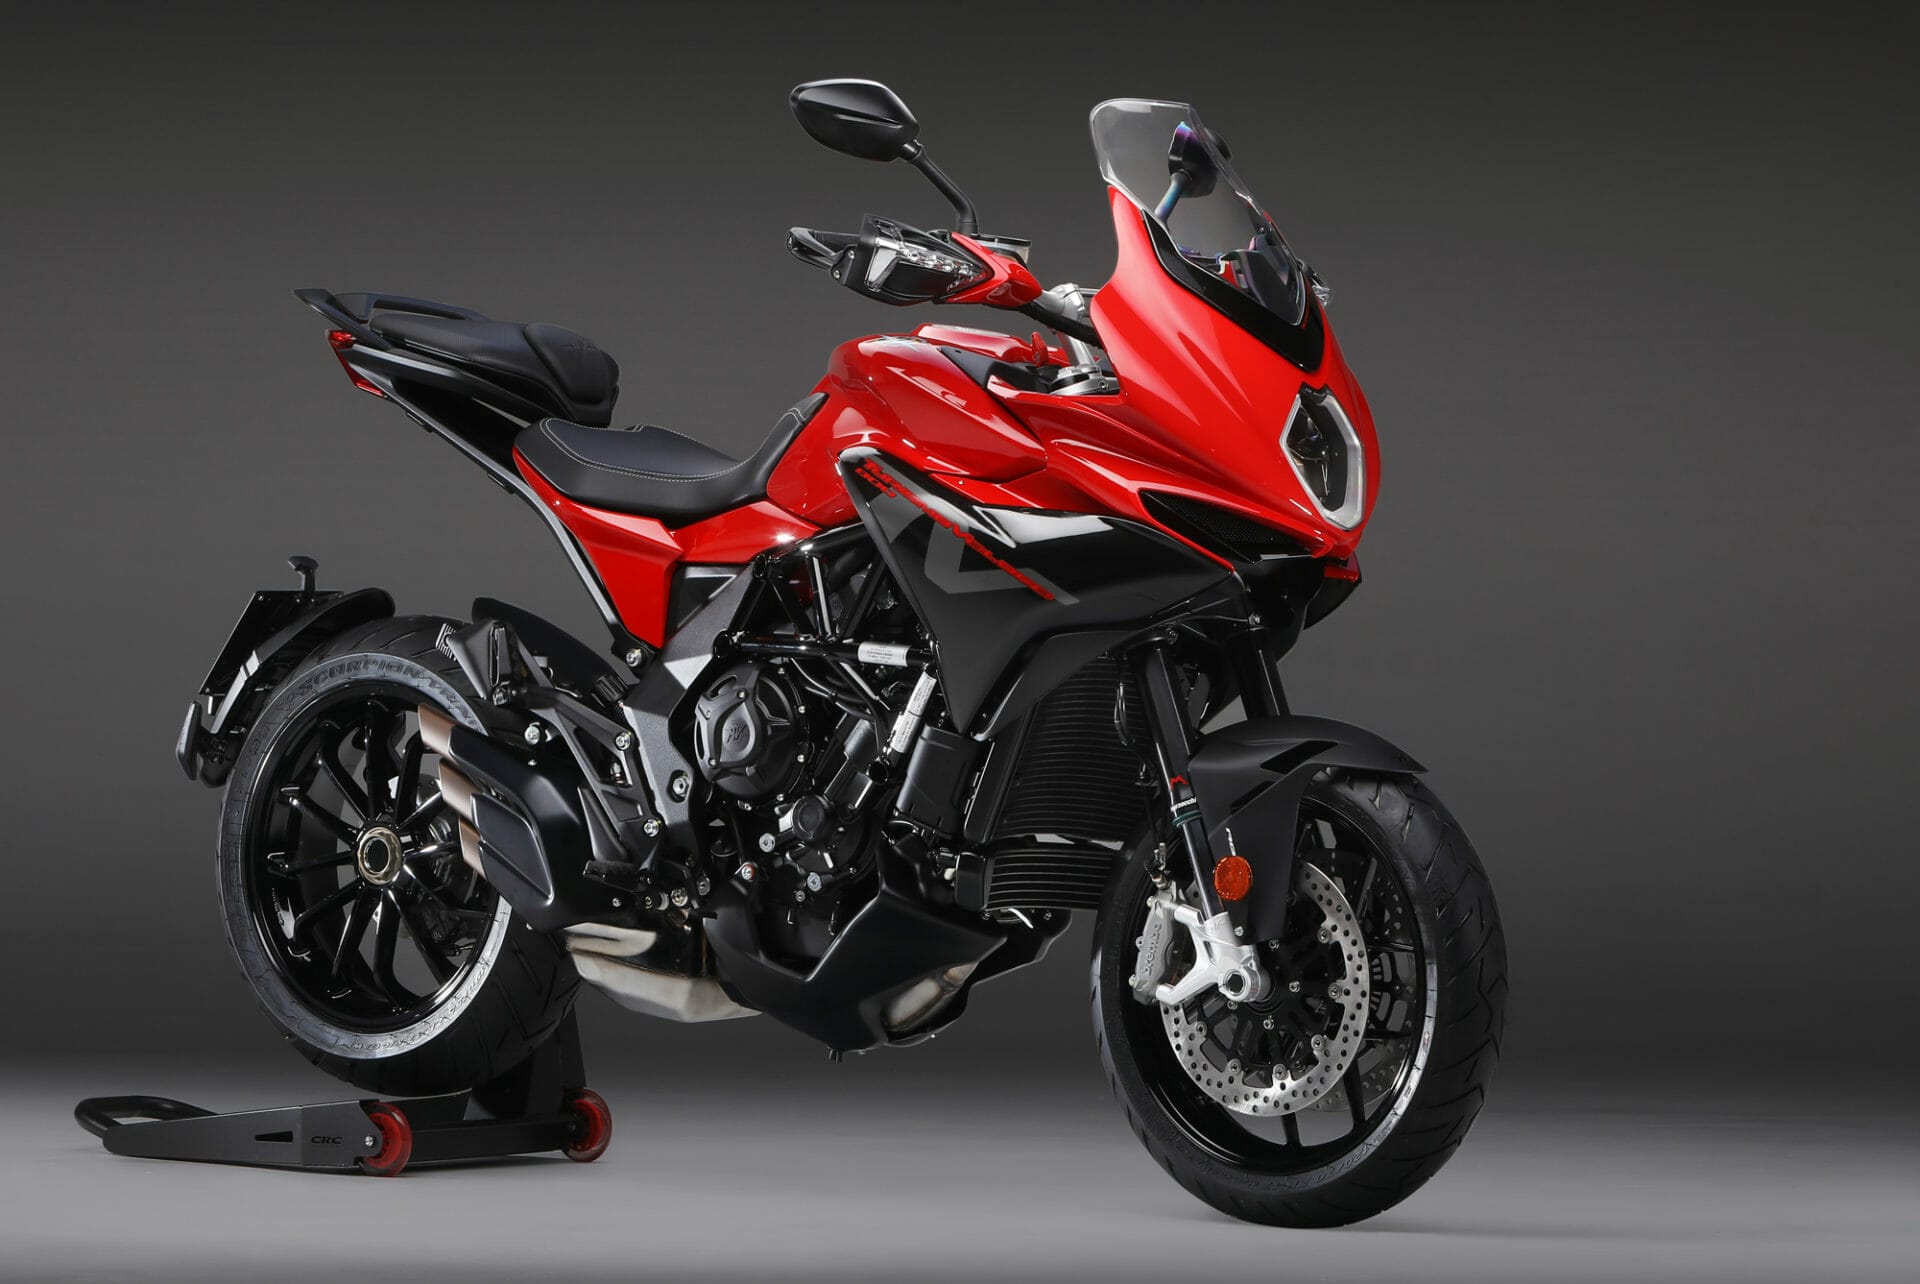 MV Agusta plans a Adventure, a 500cc range and electric mobility
- also in the App MOTORCYCLE NEWS